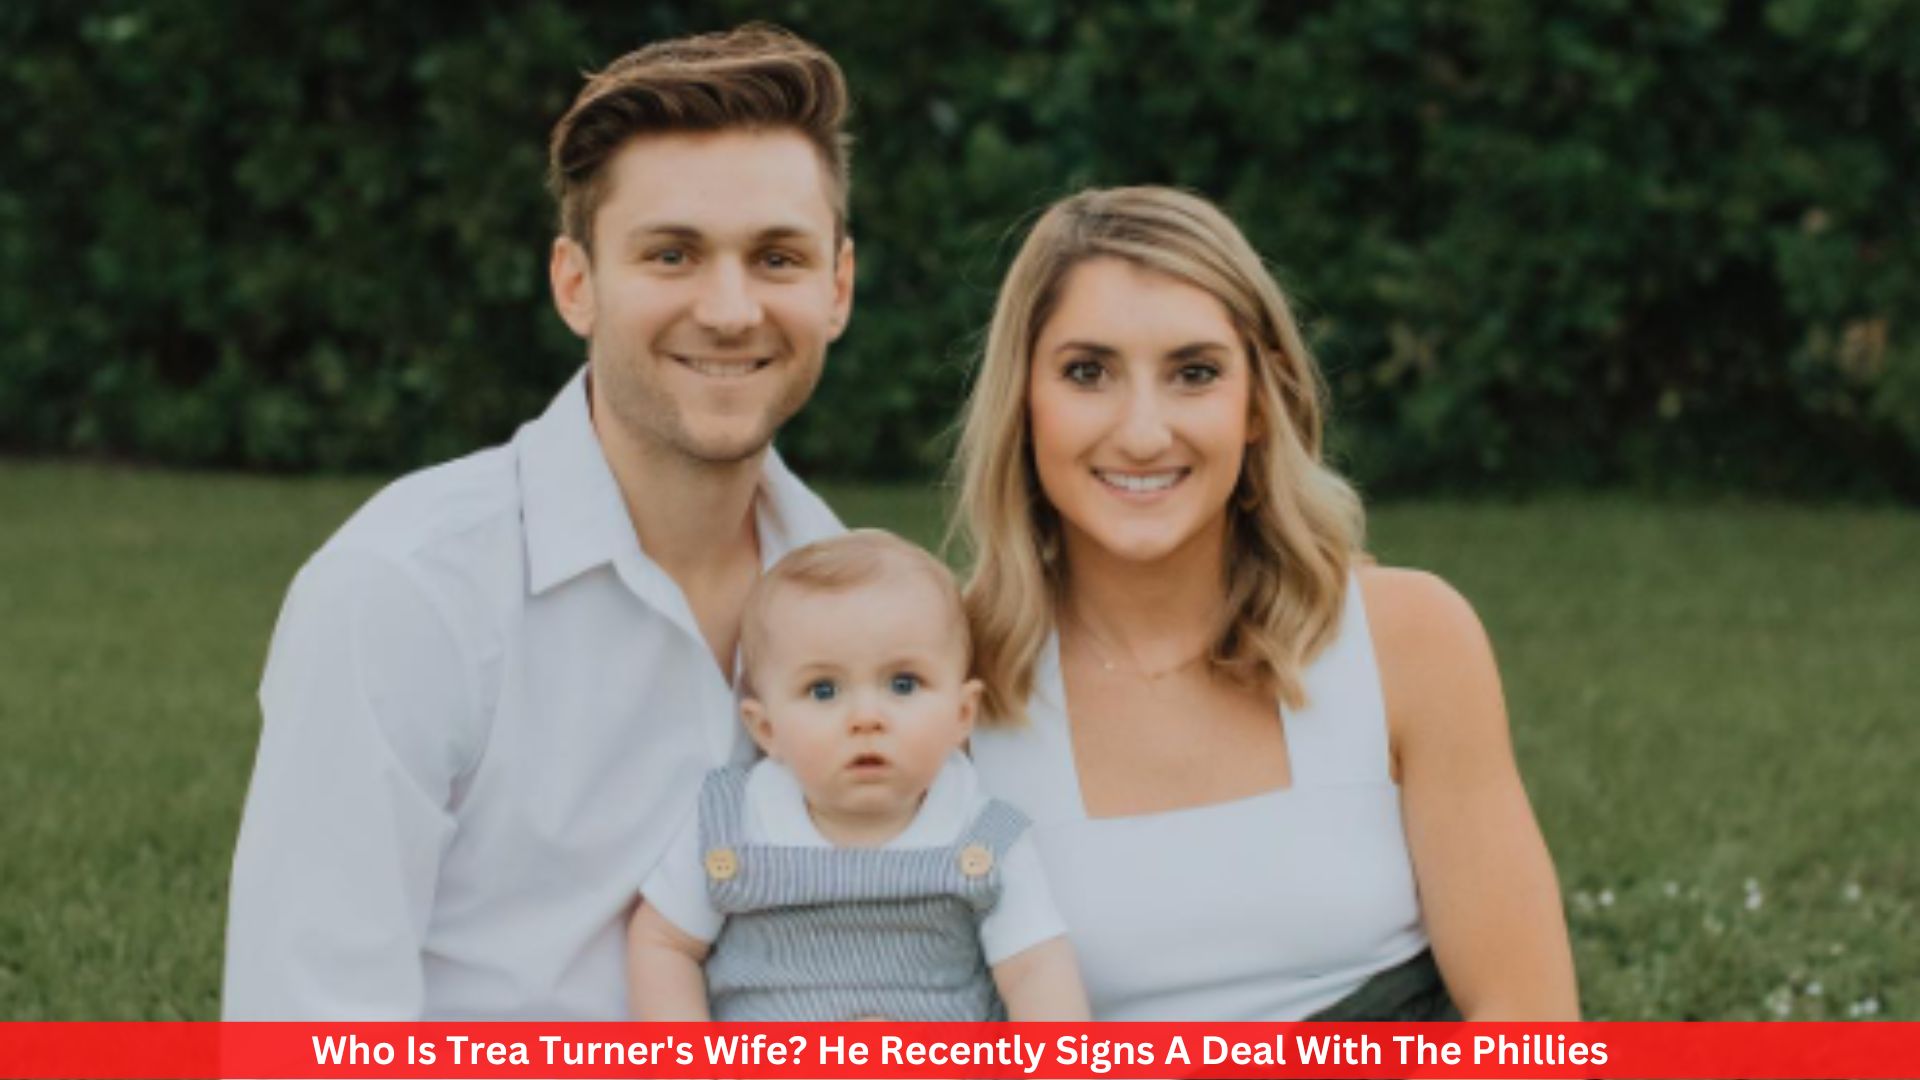 Who Is Trea Turner's Wife? He Recently Signs A Deal With The Phillies